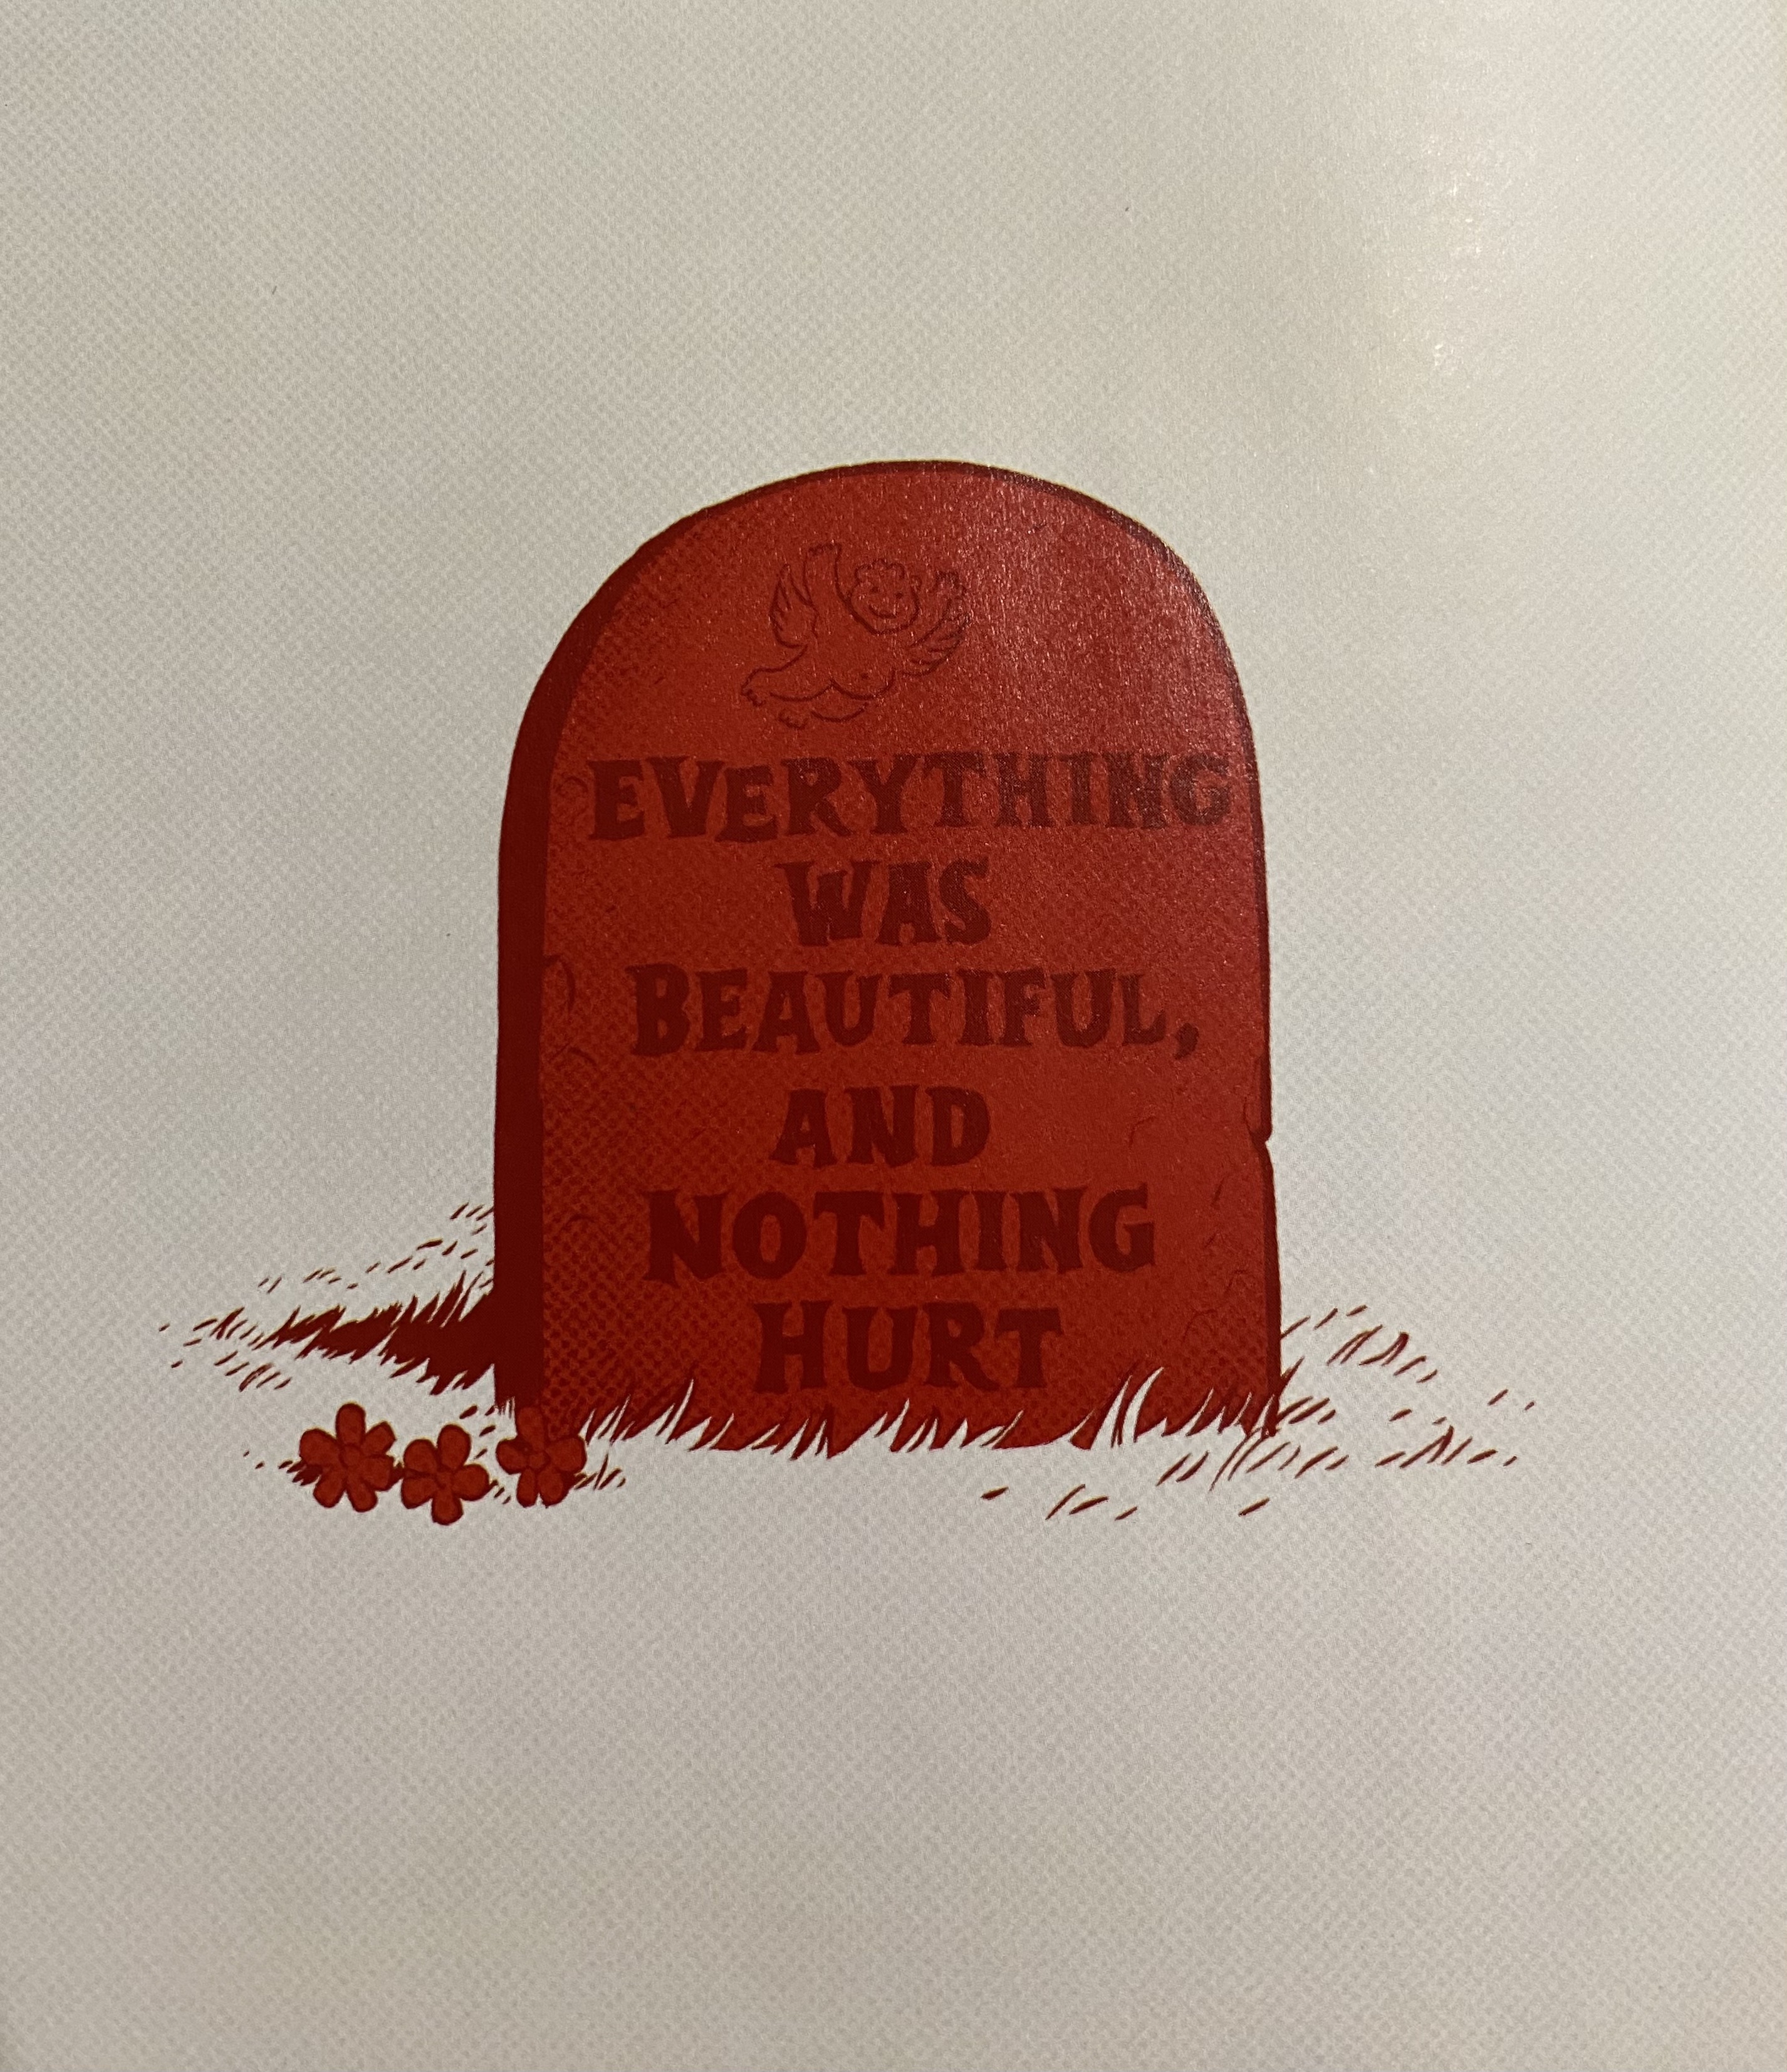 Everything was beautiful, and nothing hurt